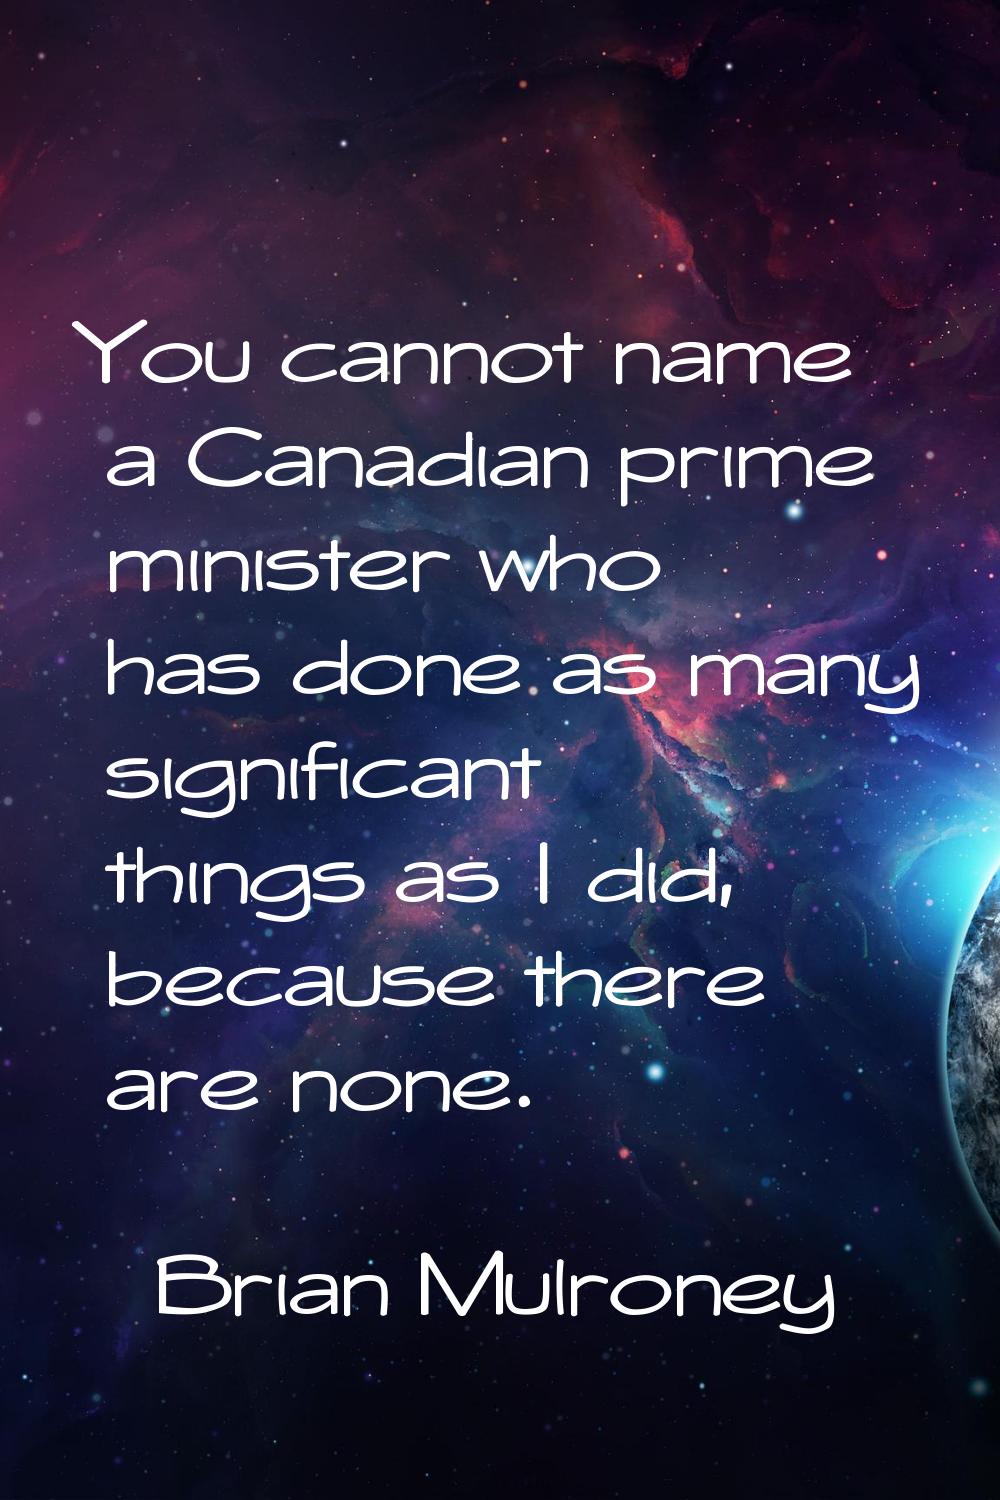 You cannot name a Canadian prime minister who has done as many significant things as I did, because